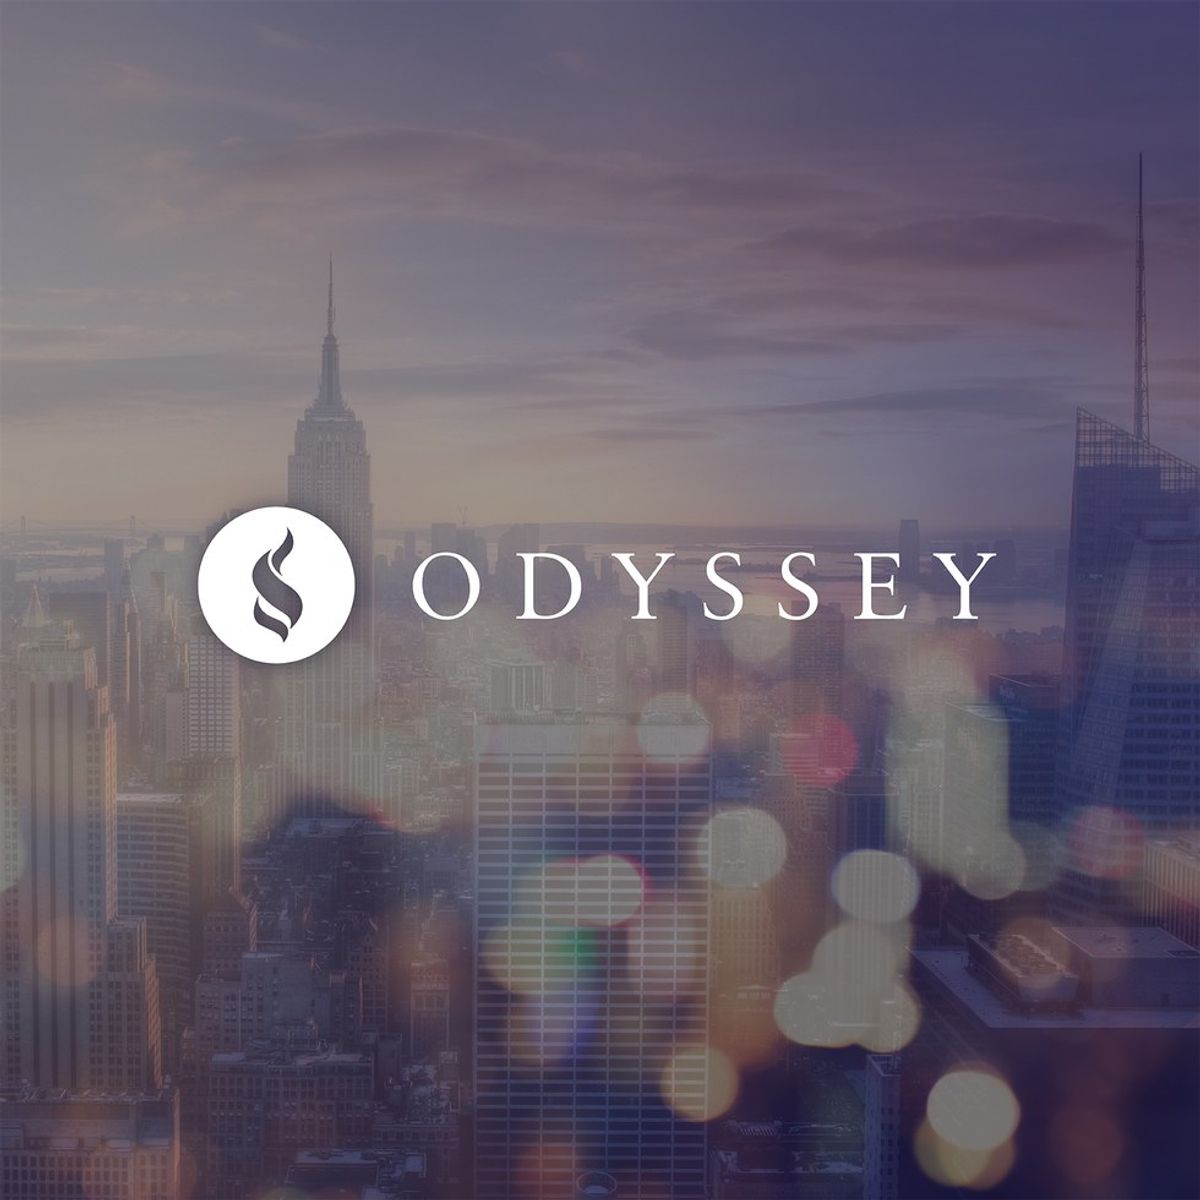 Why I Write For The Odyssey